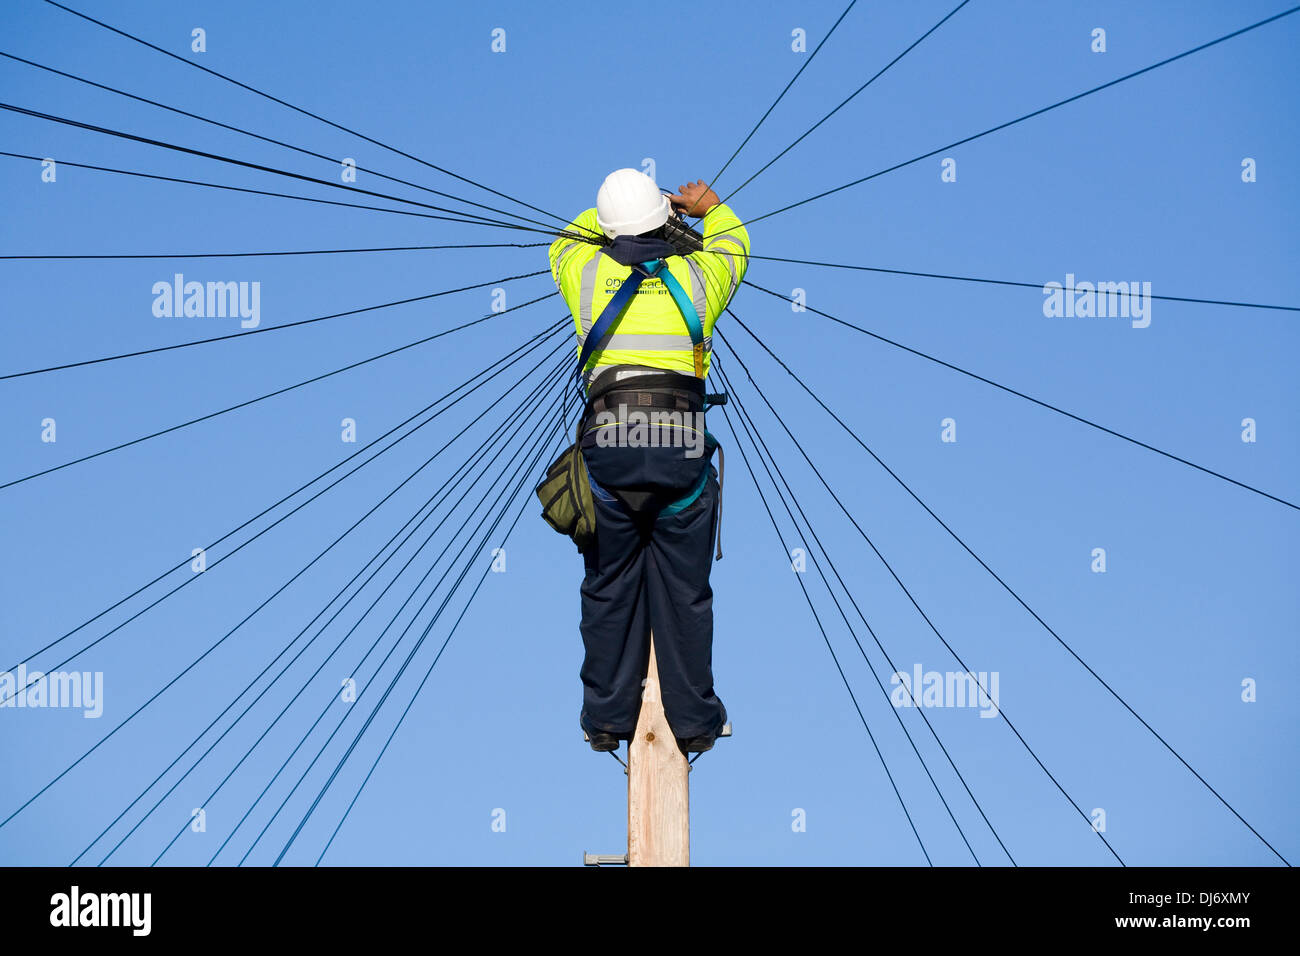 BT plc Telecom engineer (British Telecom PLC) installs a new domestic phone line and broadband internet copper wire to a telephone / telegraph pole in a London Street / Road, under a blue sky. © David Gee 4 Stock Photo